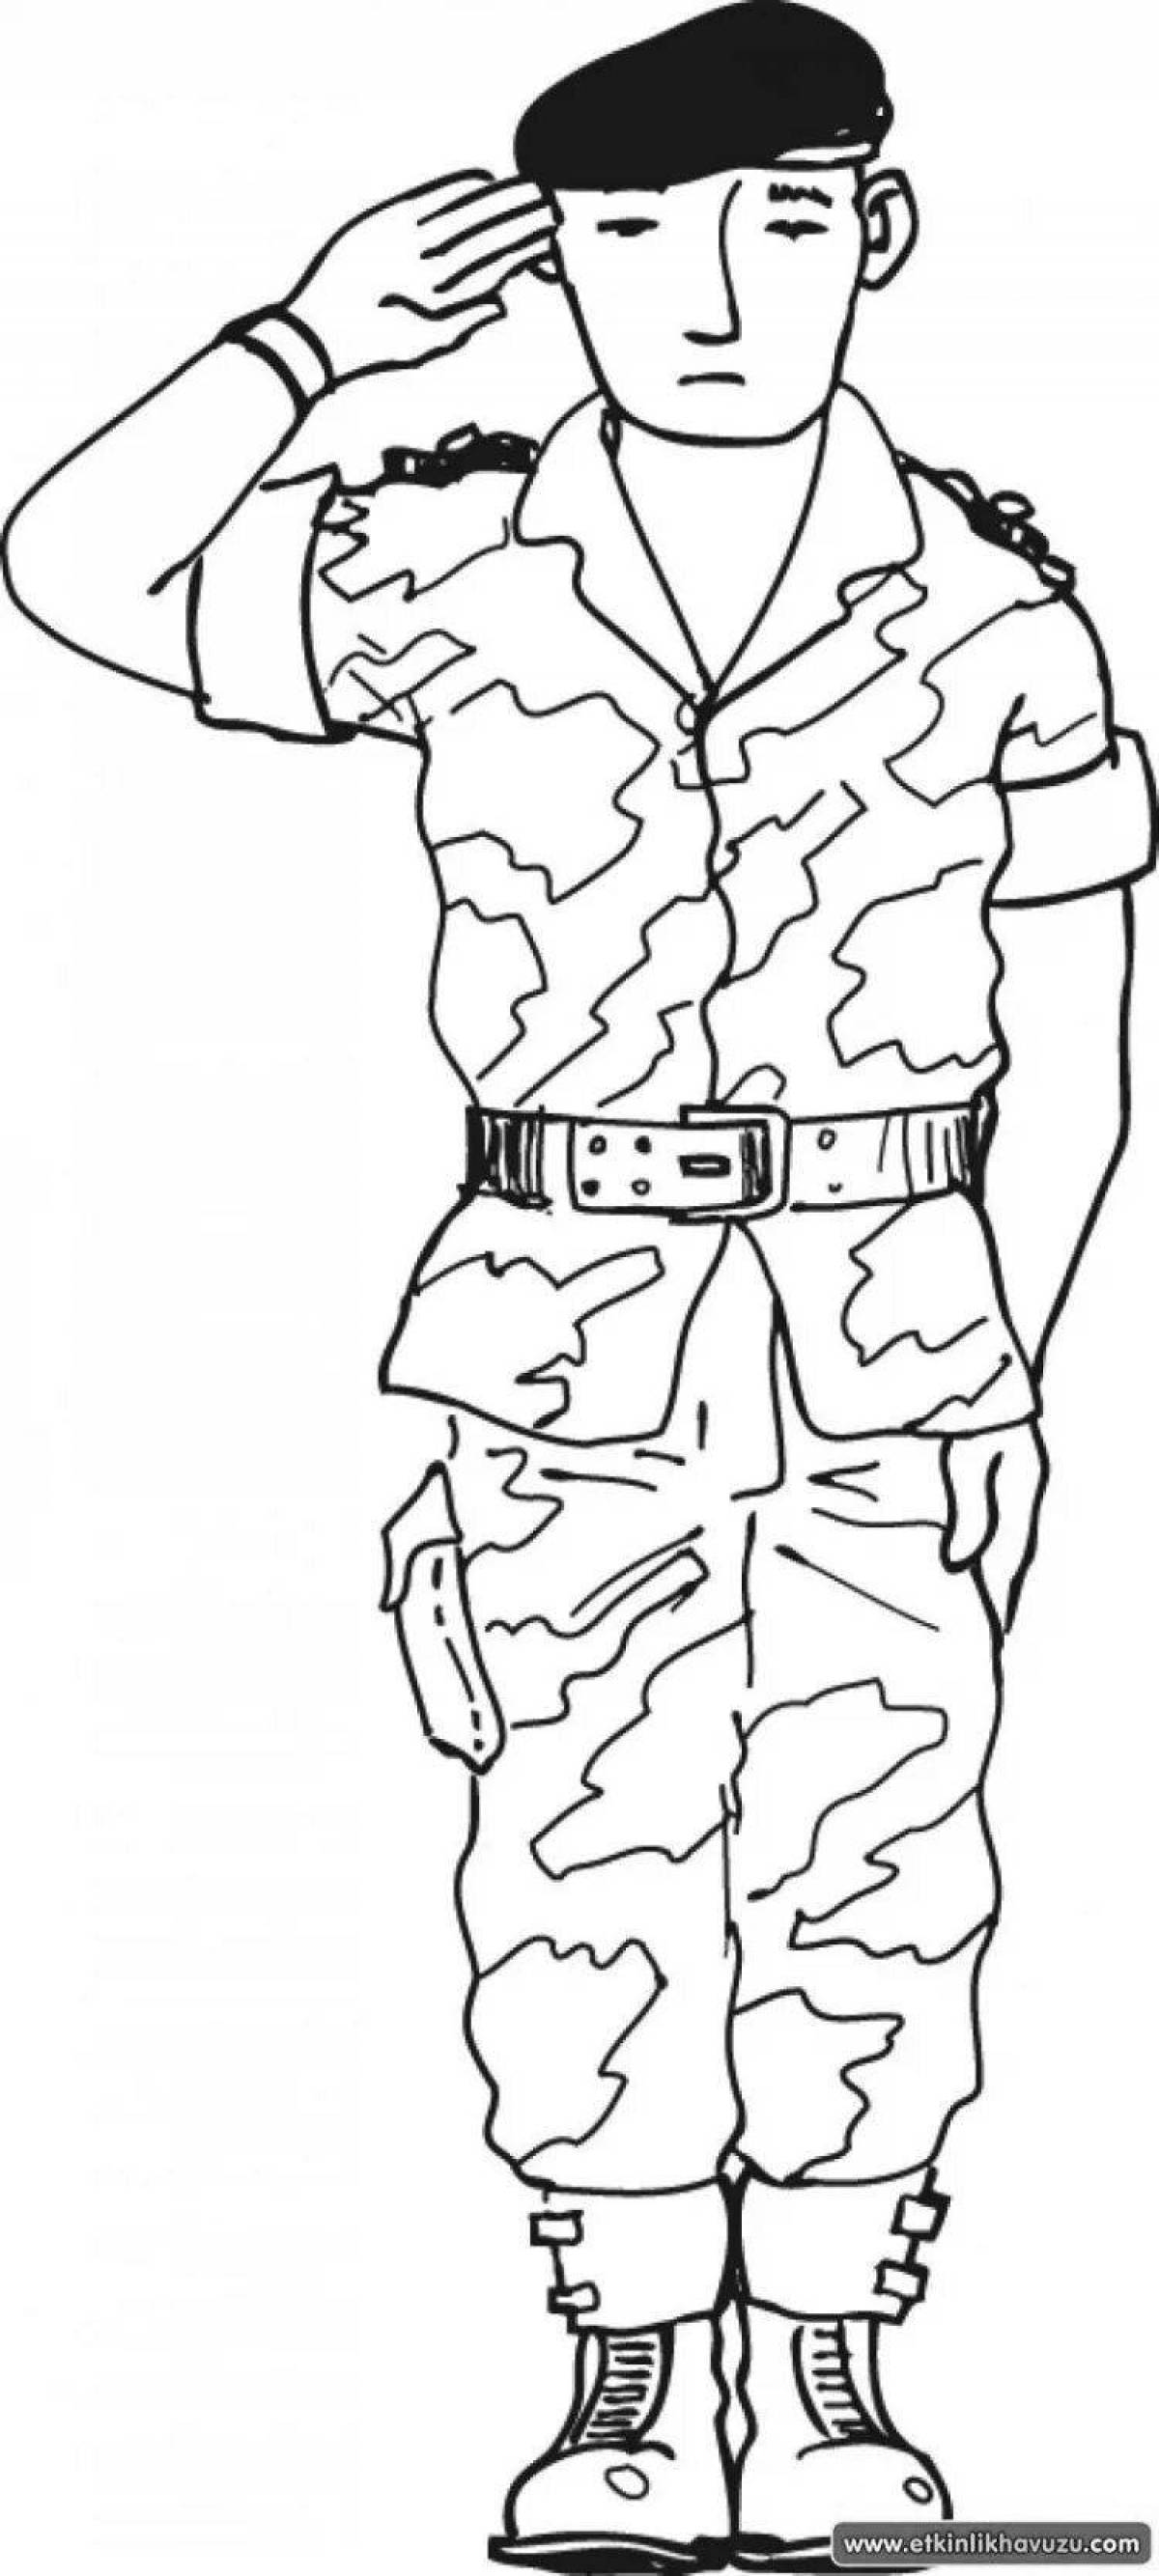 Decorated military uniform coloring page